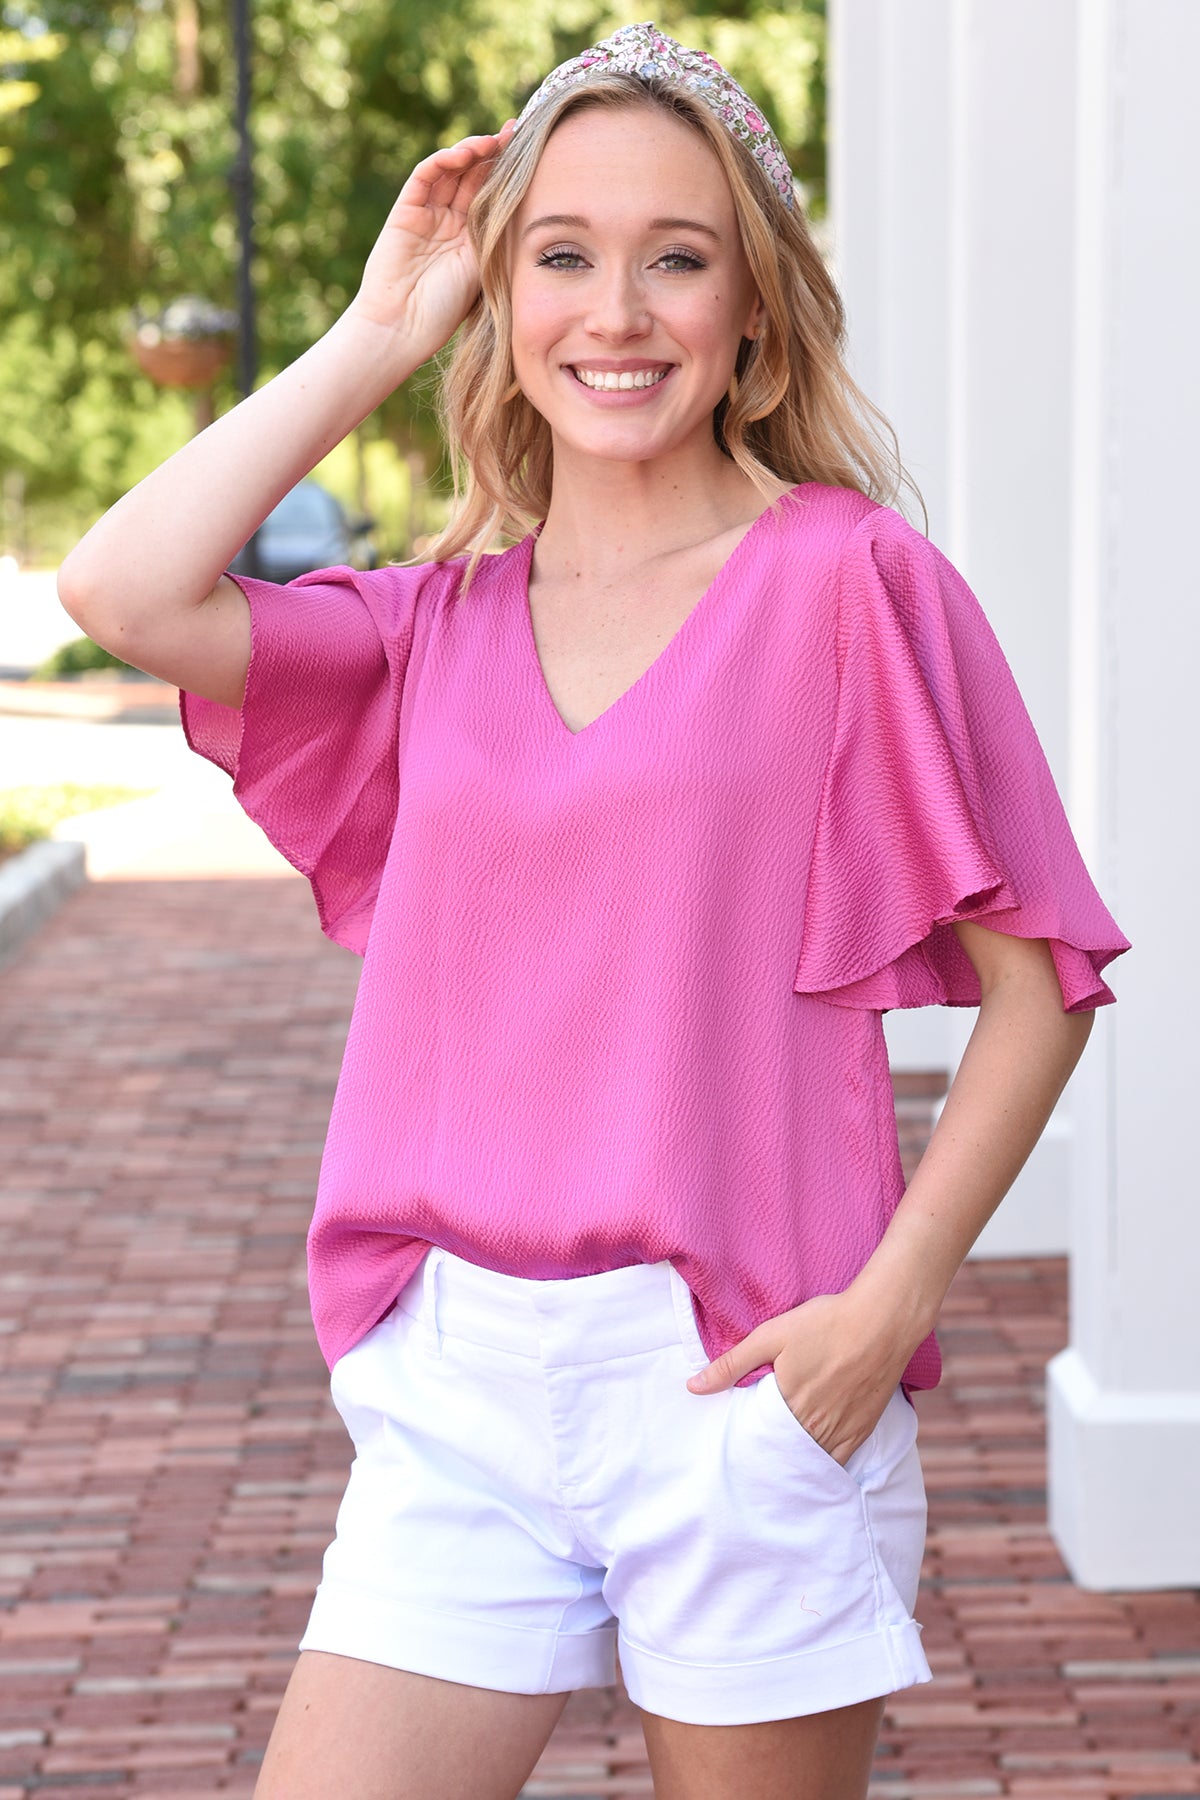 CLEAN AND SIMPLE TOP - PINK